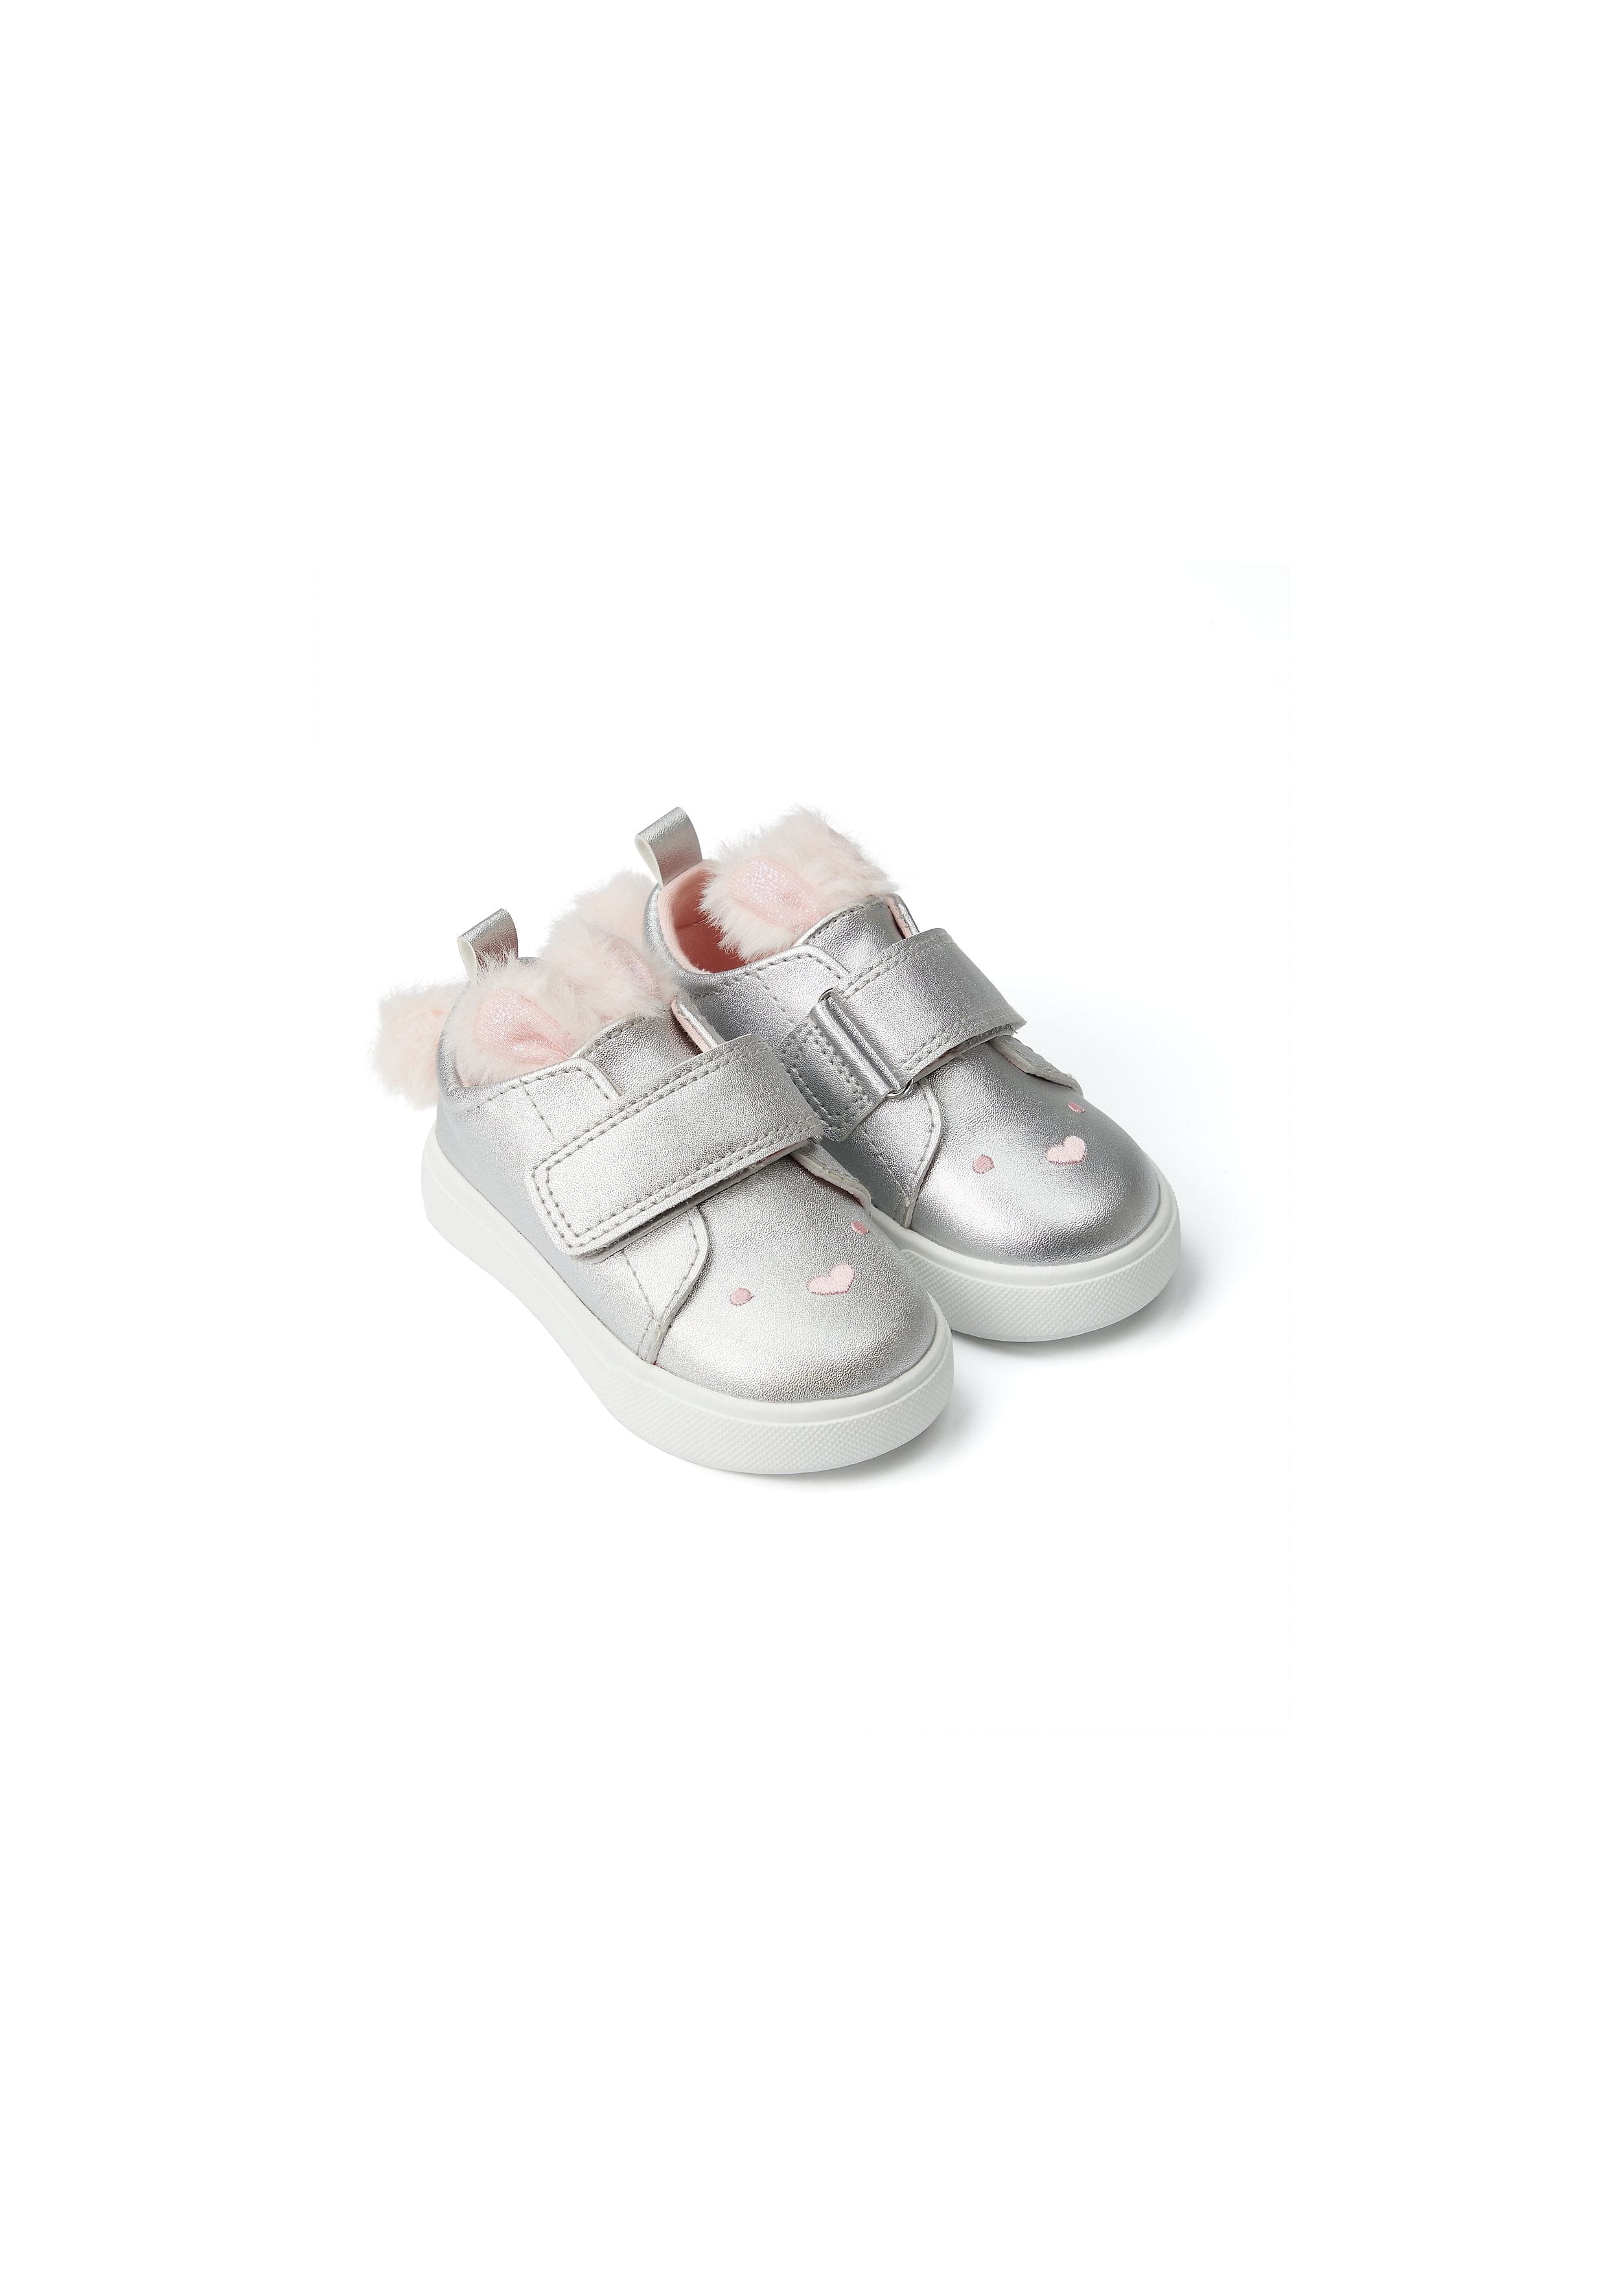 Mothercare | Girls Shoes 3D Bunny Ear Detail - Silver 0